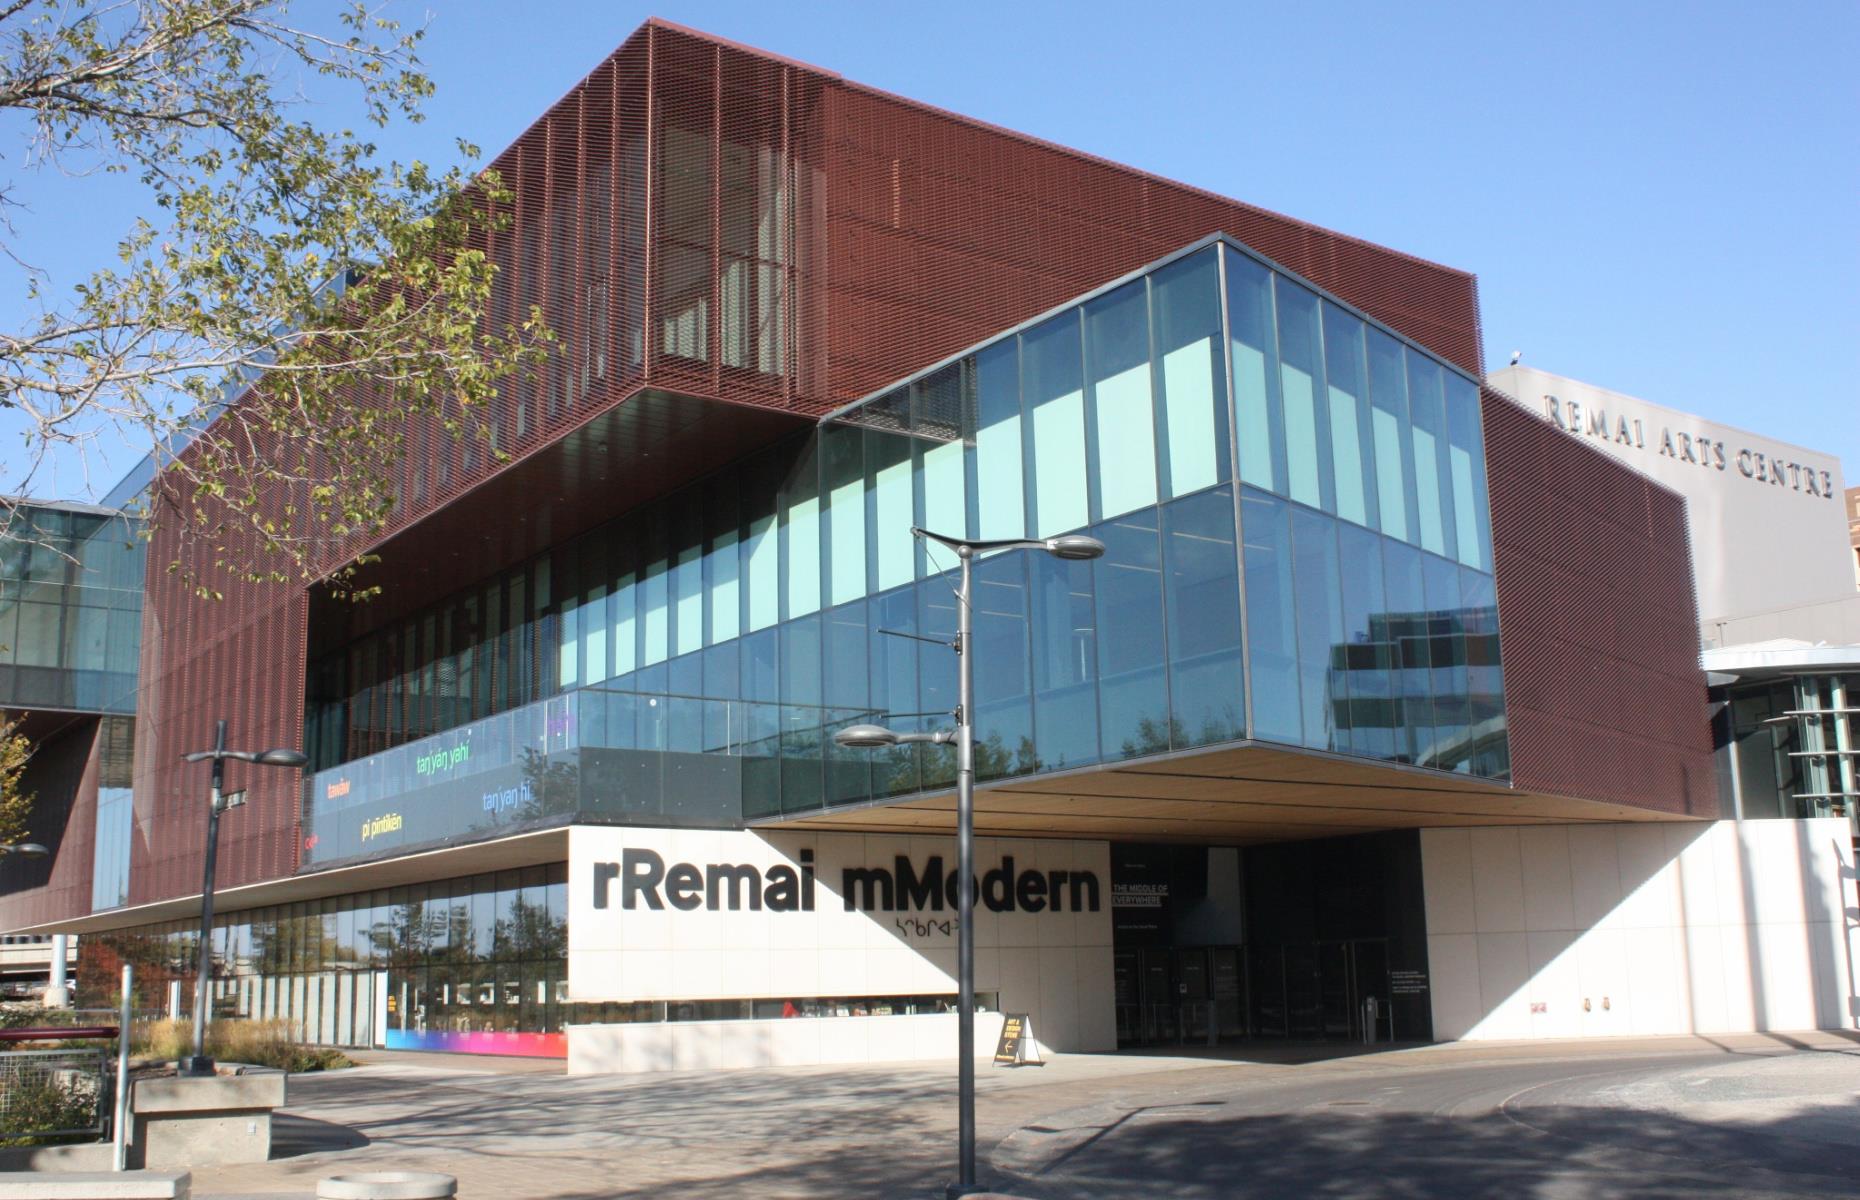 <p>Most people don’t think of the small city of Saskatoon as a major center for modern art, but the city’s <a href="http://remaimodern.org">Remai Modern</a> is a feast for the artistic senses. Set along the banks of the South Saskatchewan River, the boldly designed gallery holds over 8,000 works in its collection and regularly hosts thought-provoking exhibitions, talks and events. Visitors can see everything from contemporary Metis art to ceramics by Pablo Picasso, plus experimental video installations and shows from local artists.</p>